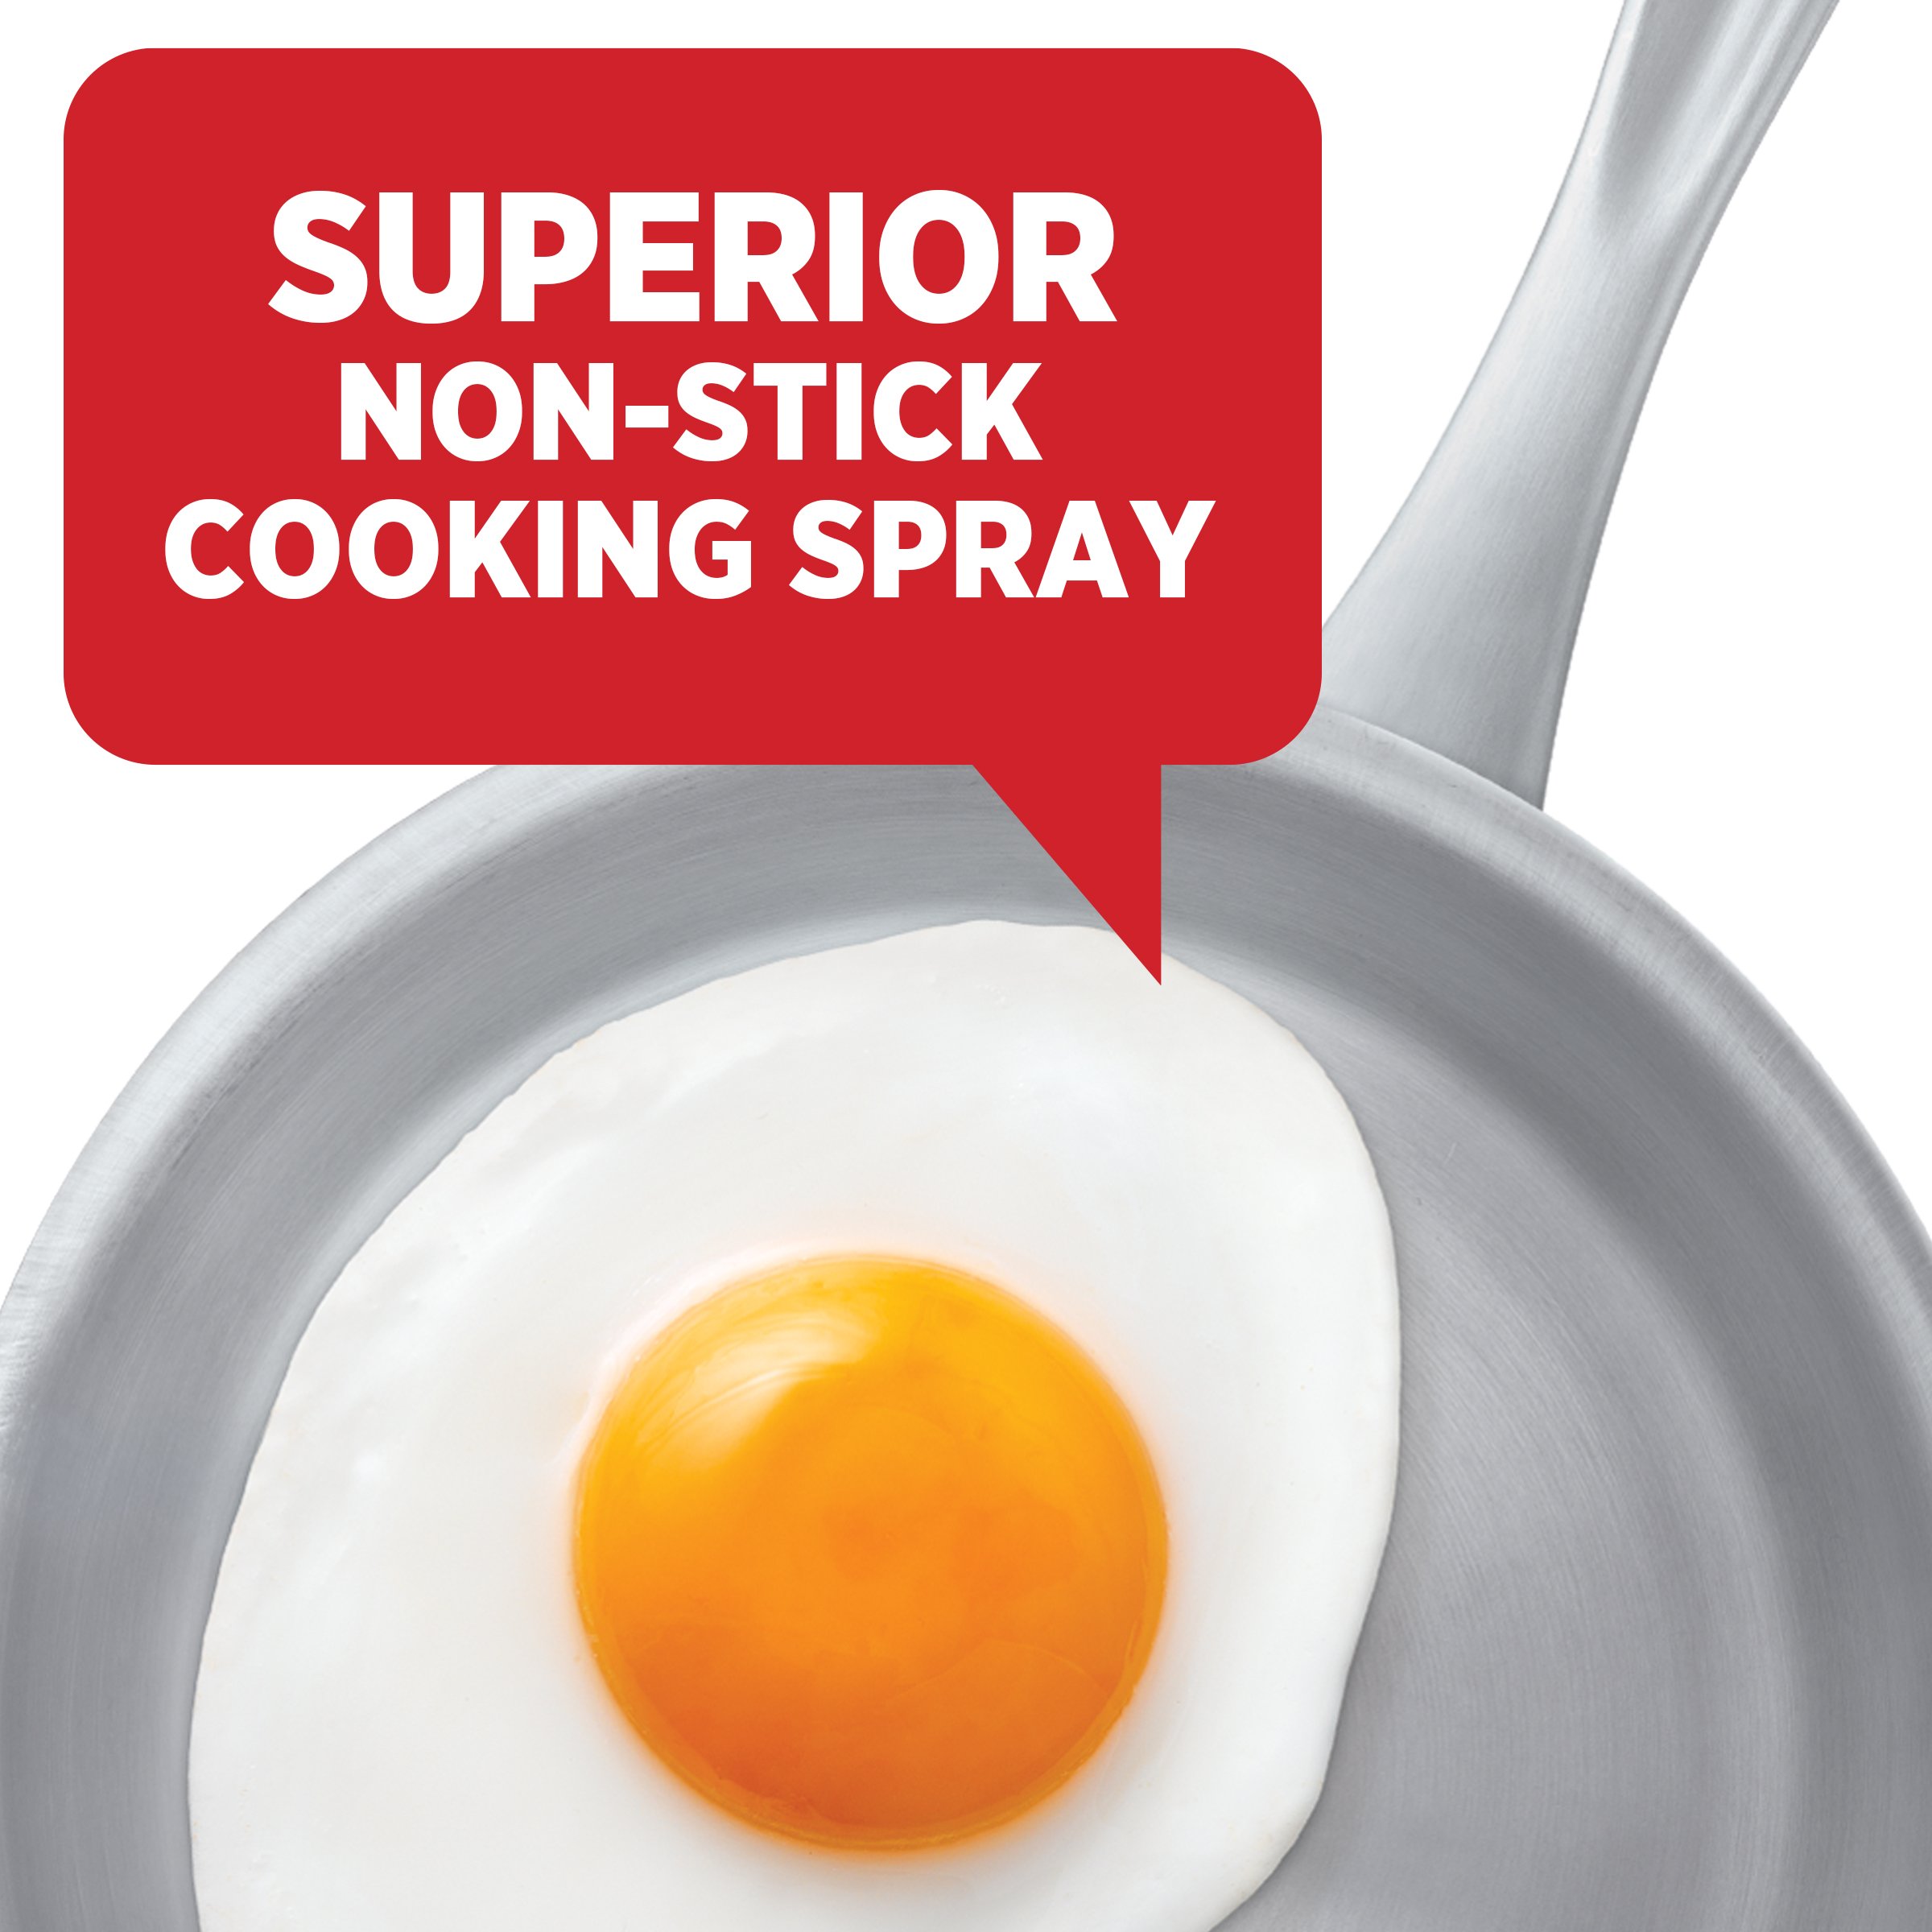 PAM Non Stick Olive Oil Cooking Spray - Shop Oils at H-E-B